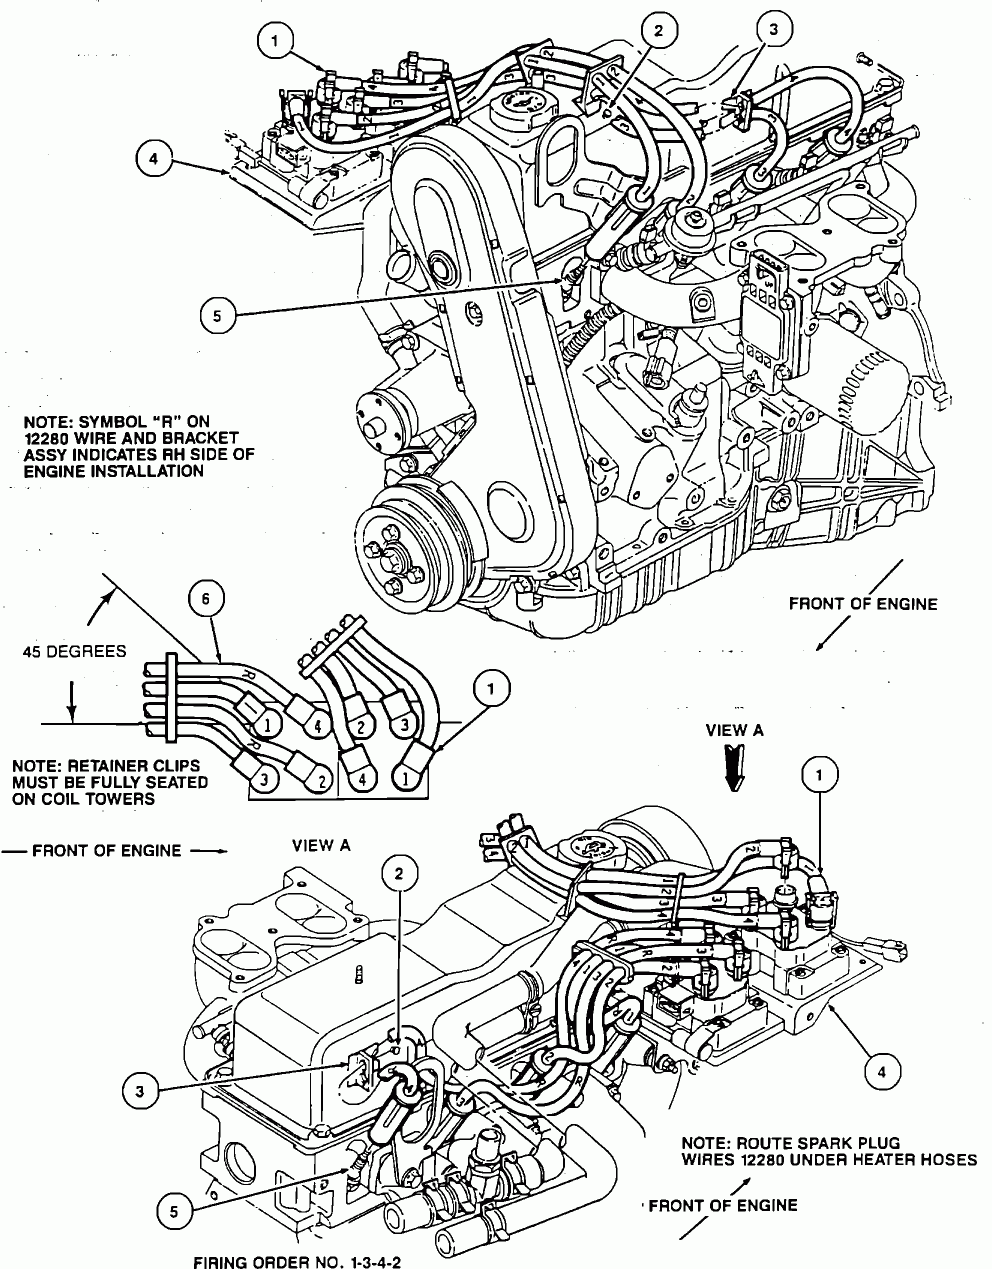 I Need A Schematic Diagram Showing How The Spark Plug Wires